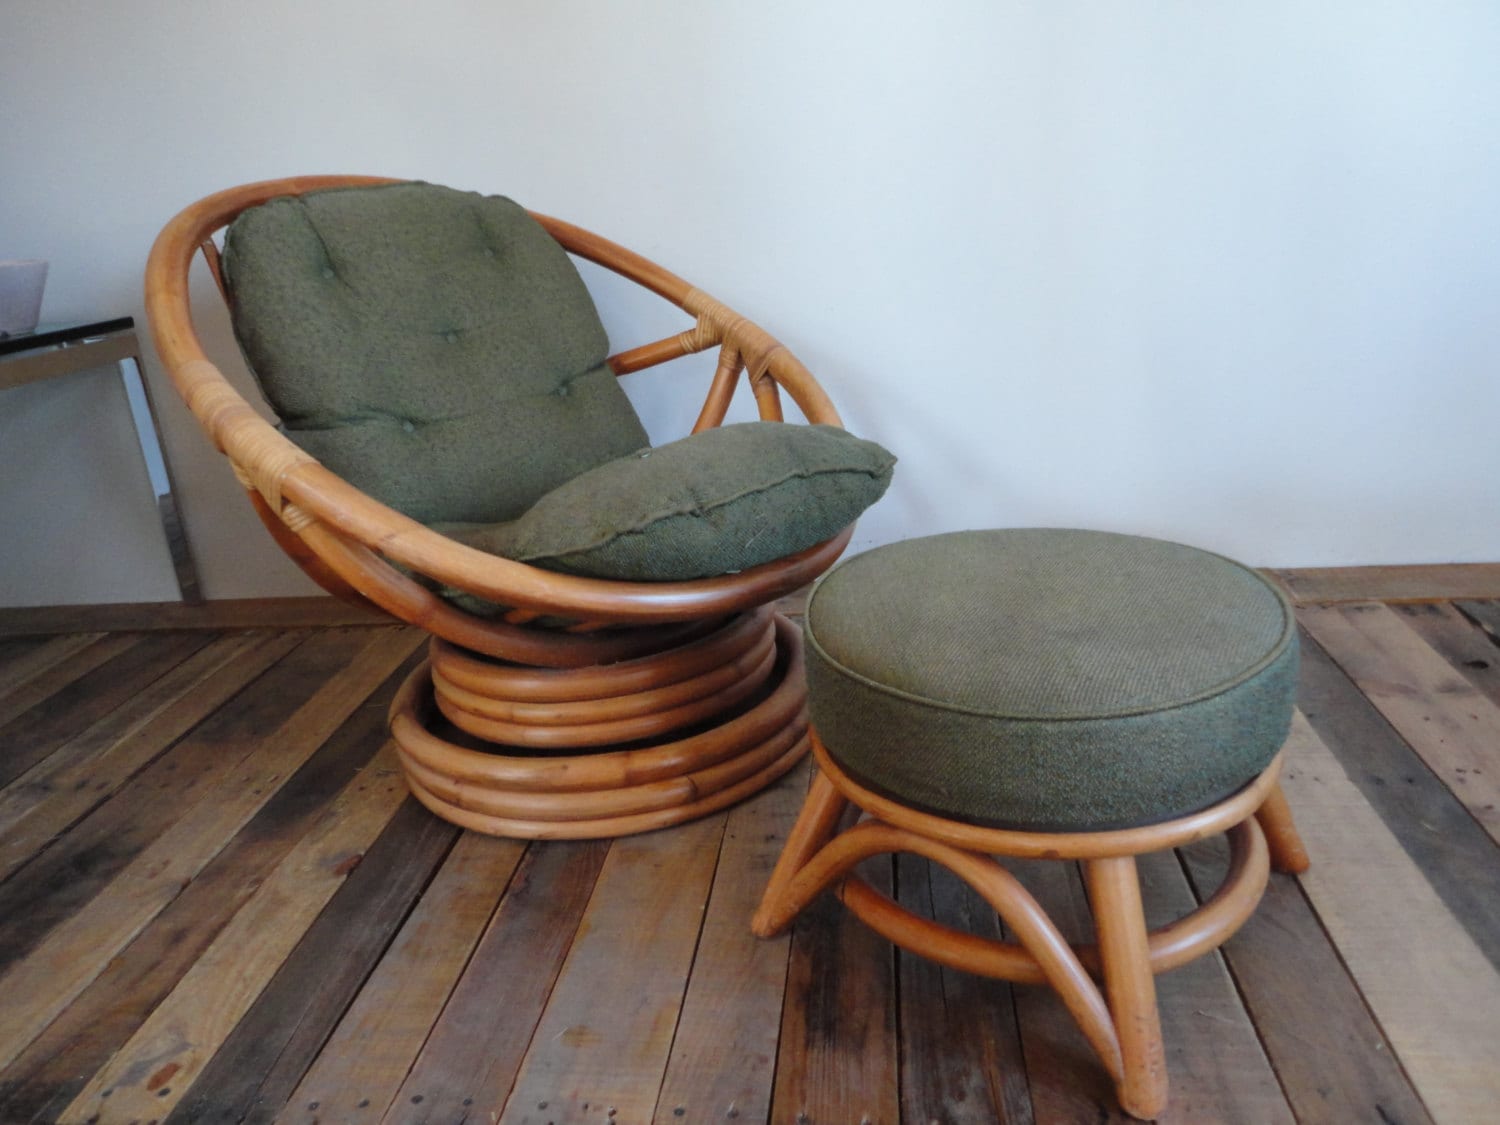 Low Rider SWIVEL Rattan Chair with Ottoman Vintage 60s 70s Mid